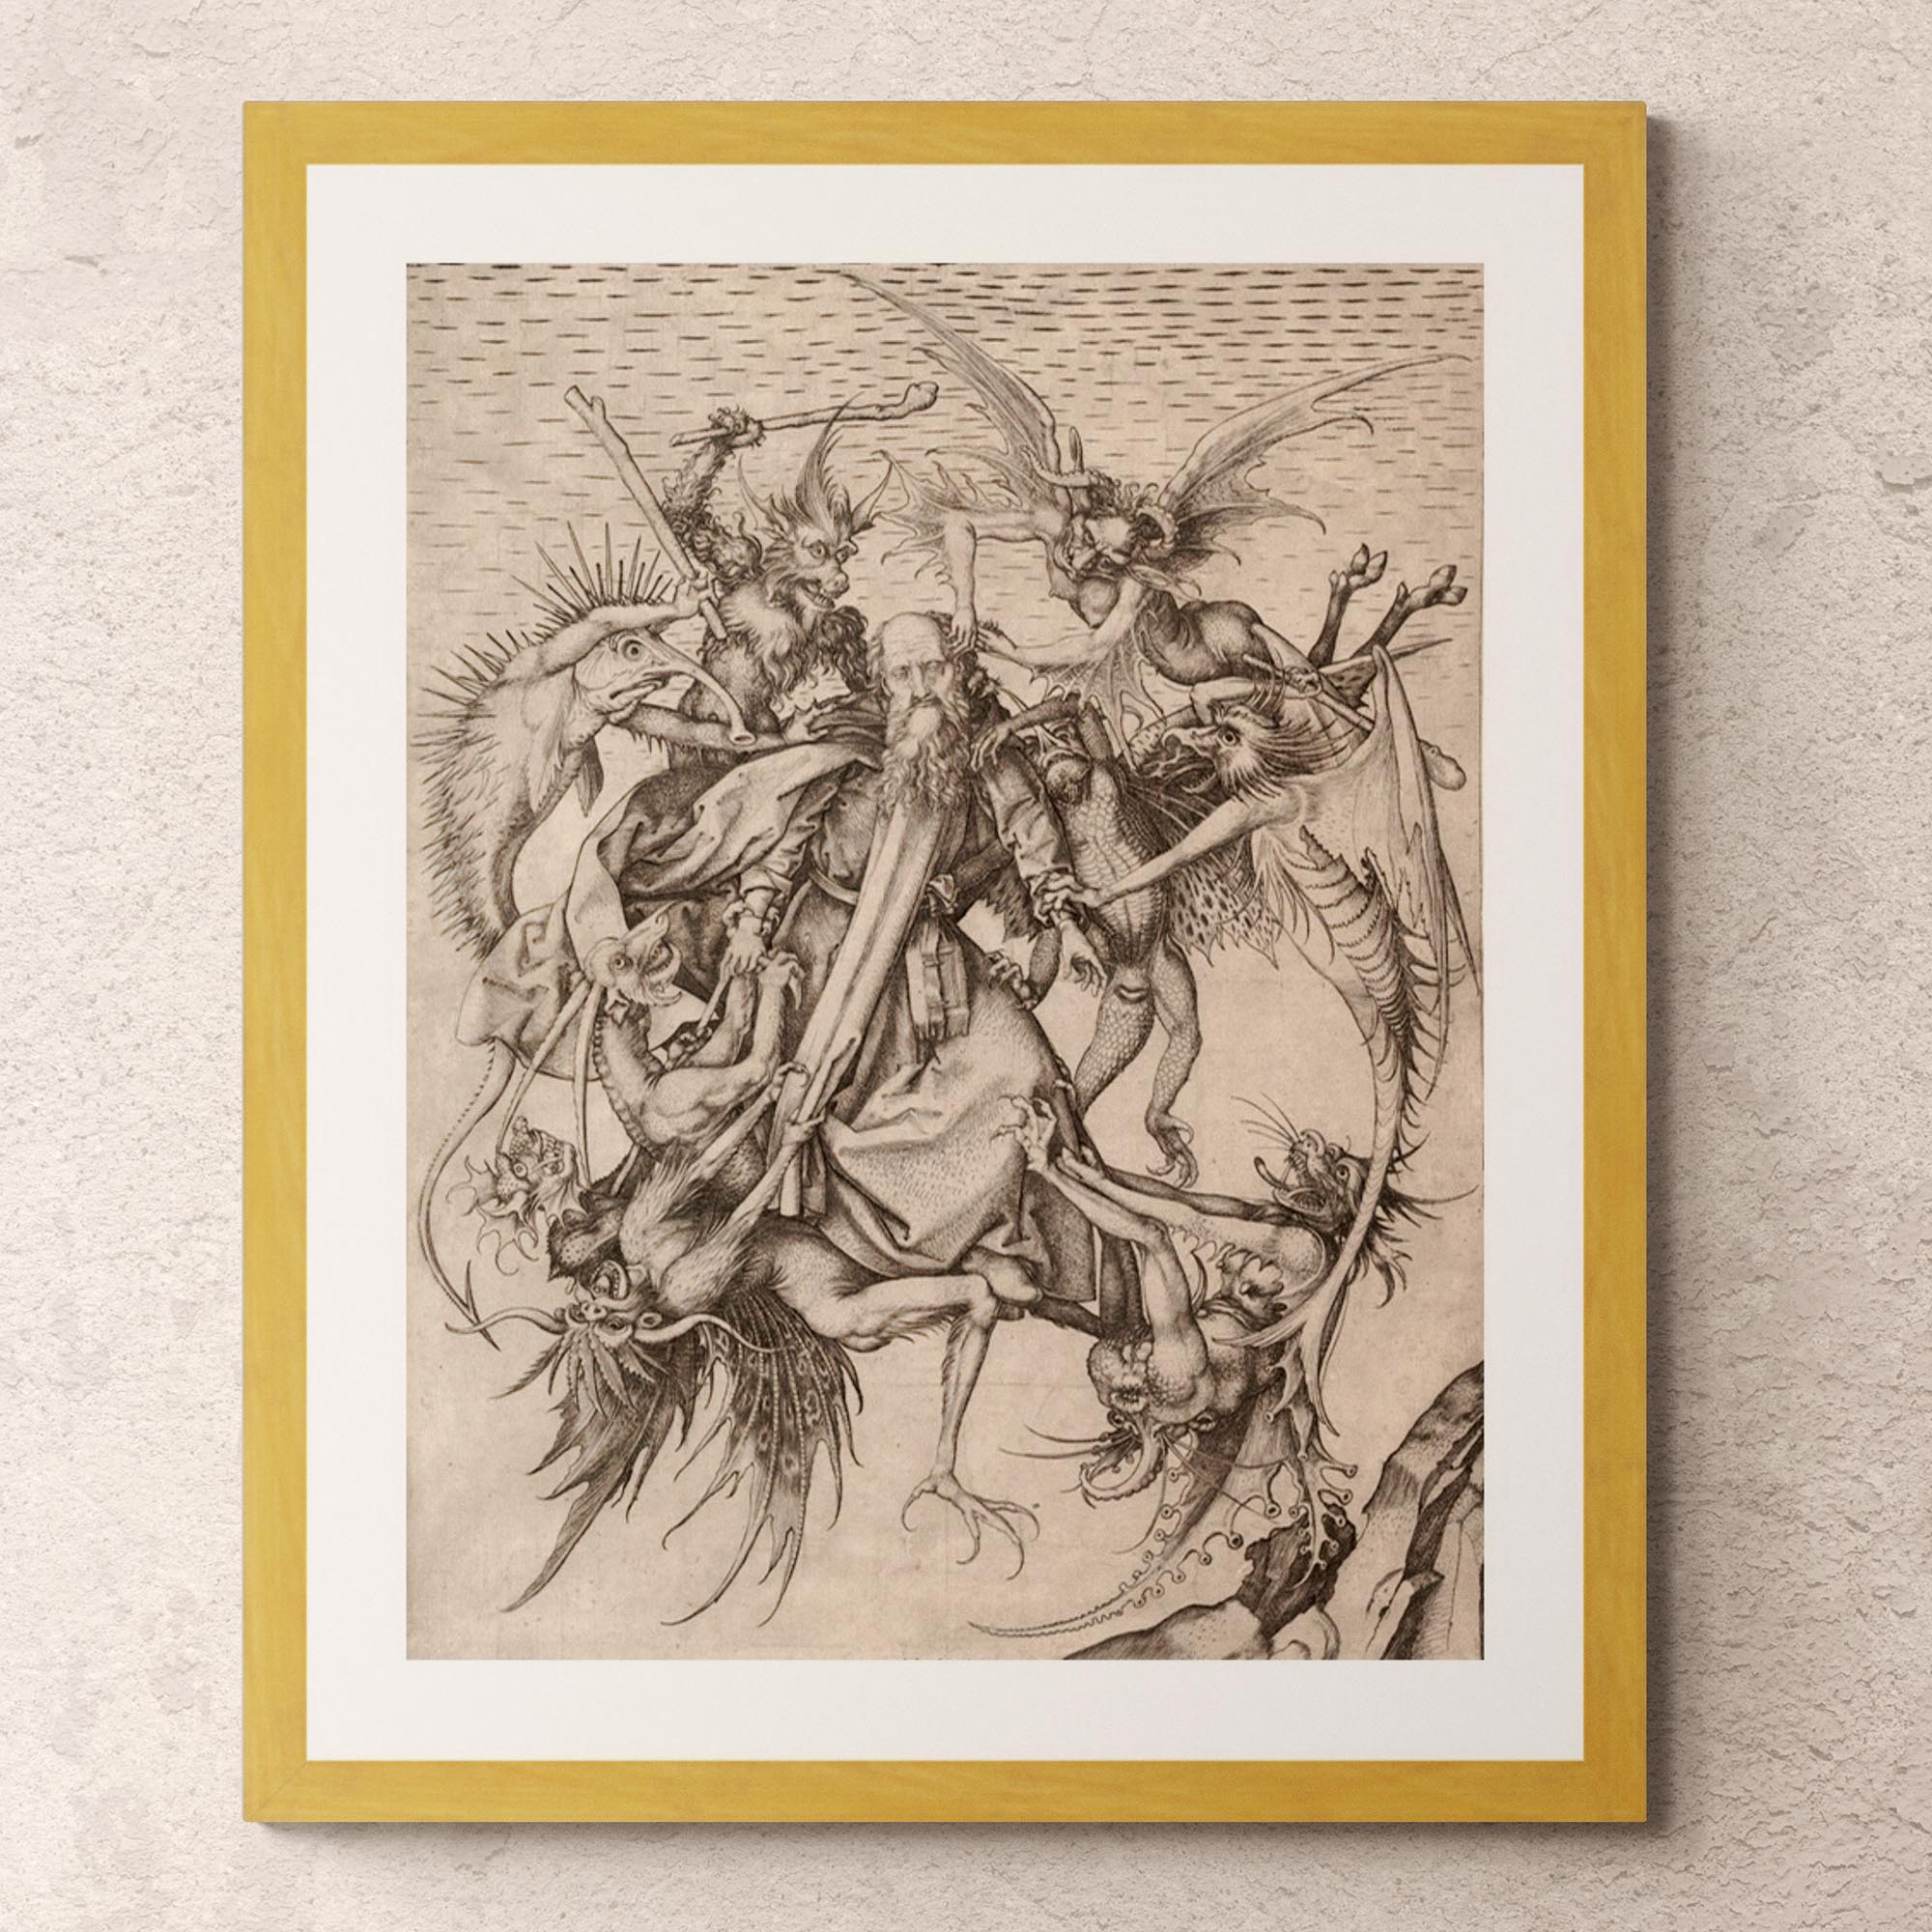 Fine art 6"x8" / Gold Frame The Temptation of Saint Anthony | Surreal Schongauer Gothic Devil and Demons | Occult Antique Framed Art Print